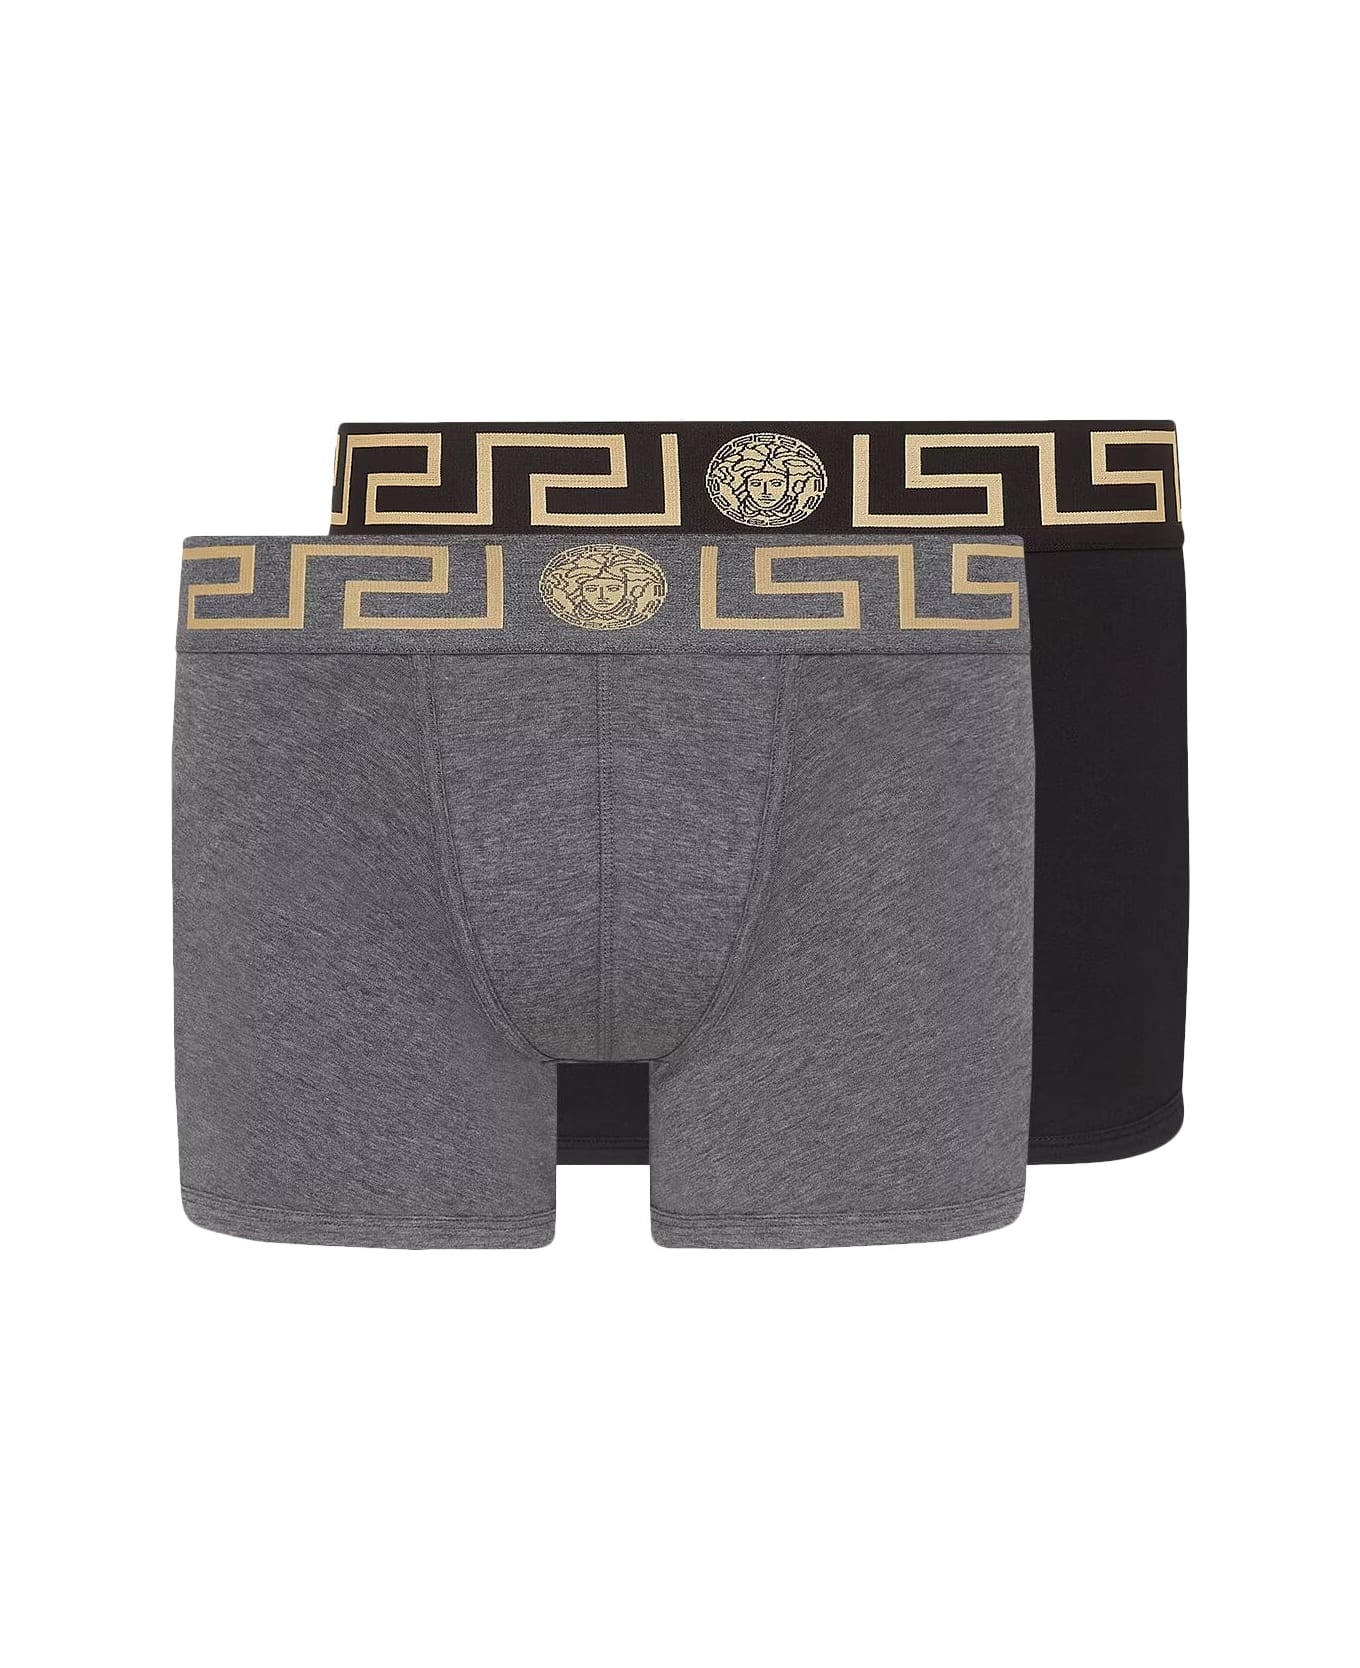 Versace Pack Of Two Boxer Shorts With Greek Motif - BK/GR